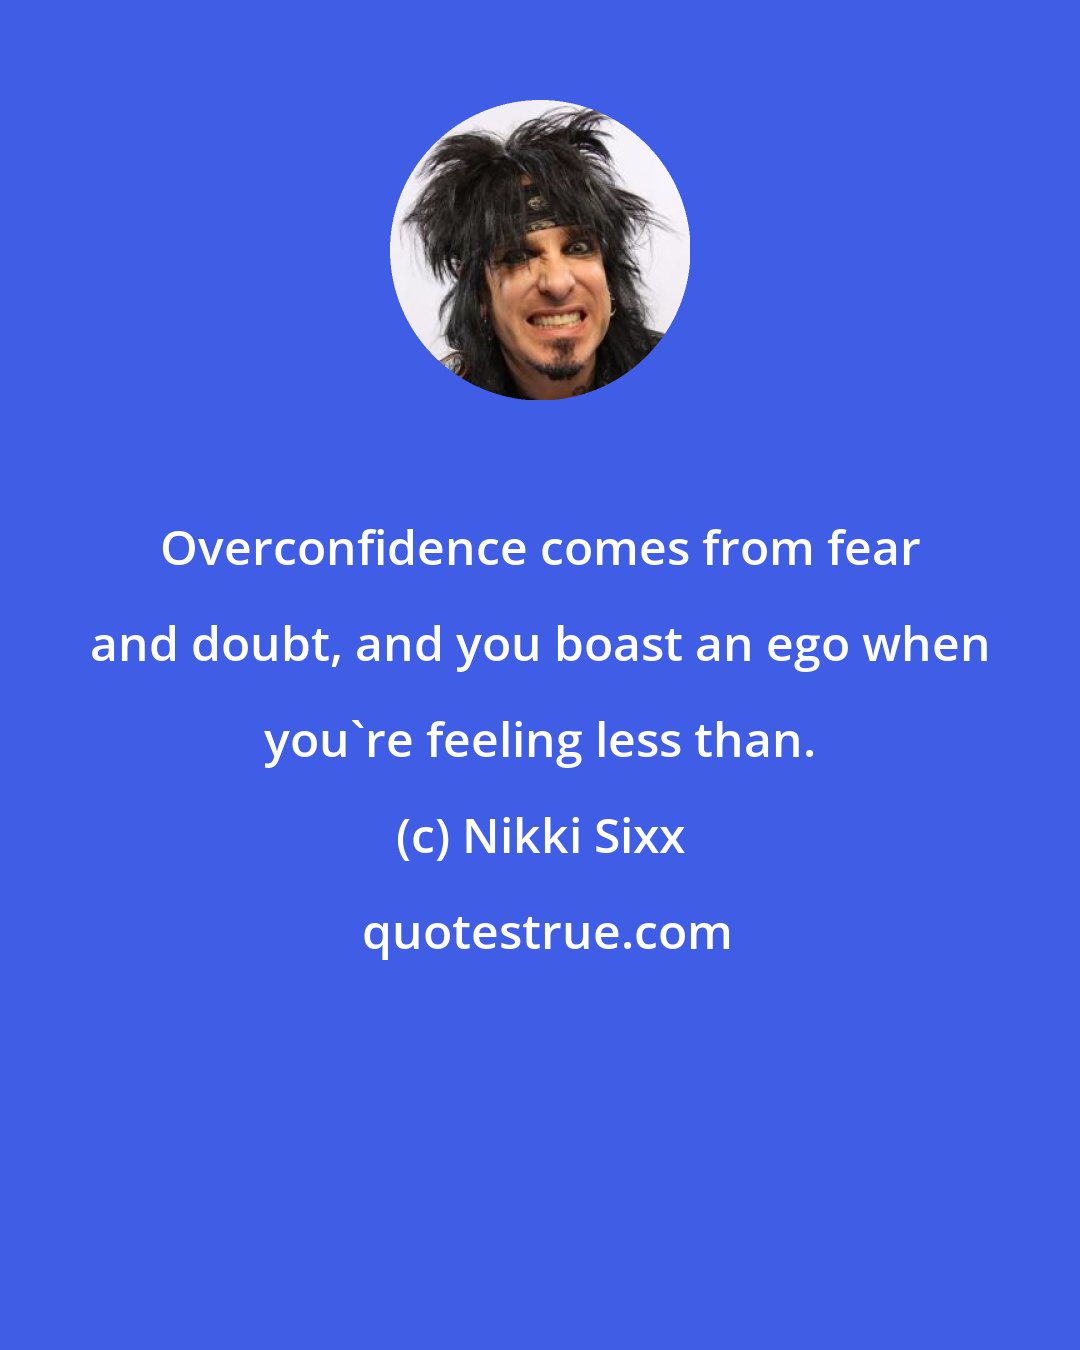 Nikki Sixx: Overconfidence comes from fear and doubt, and you boast an ego when you're feeling less than.